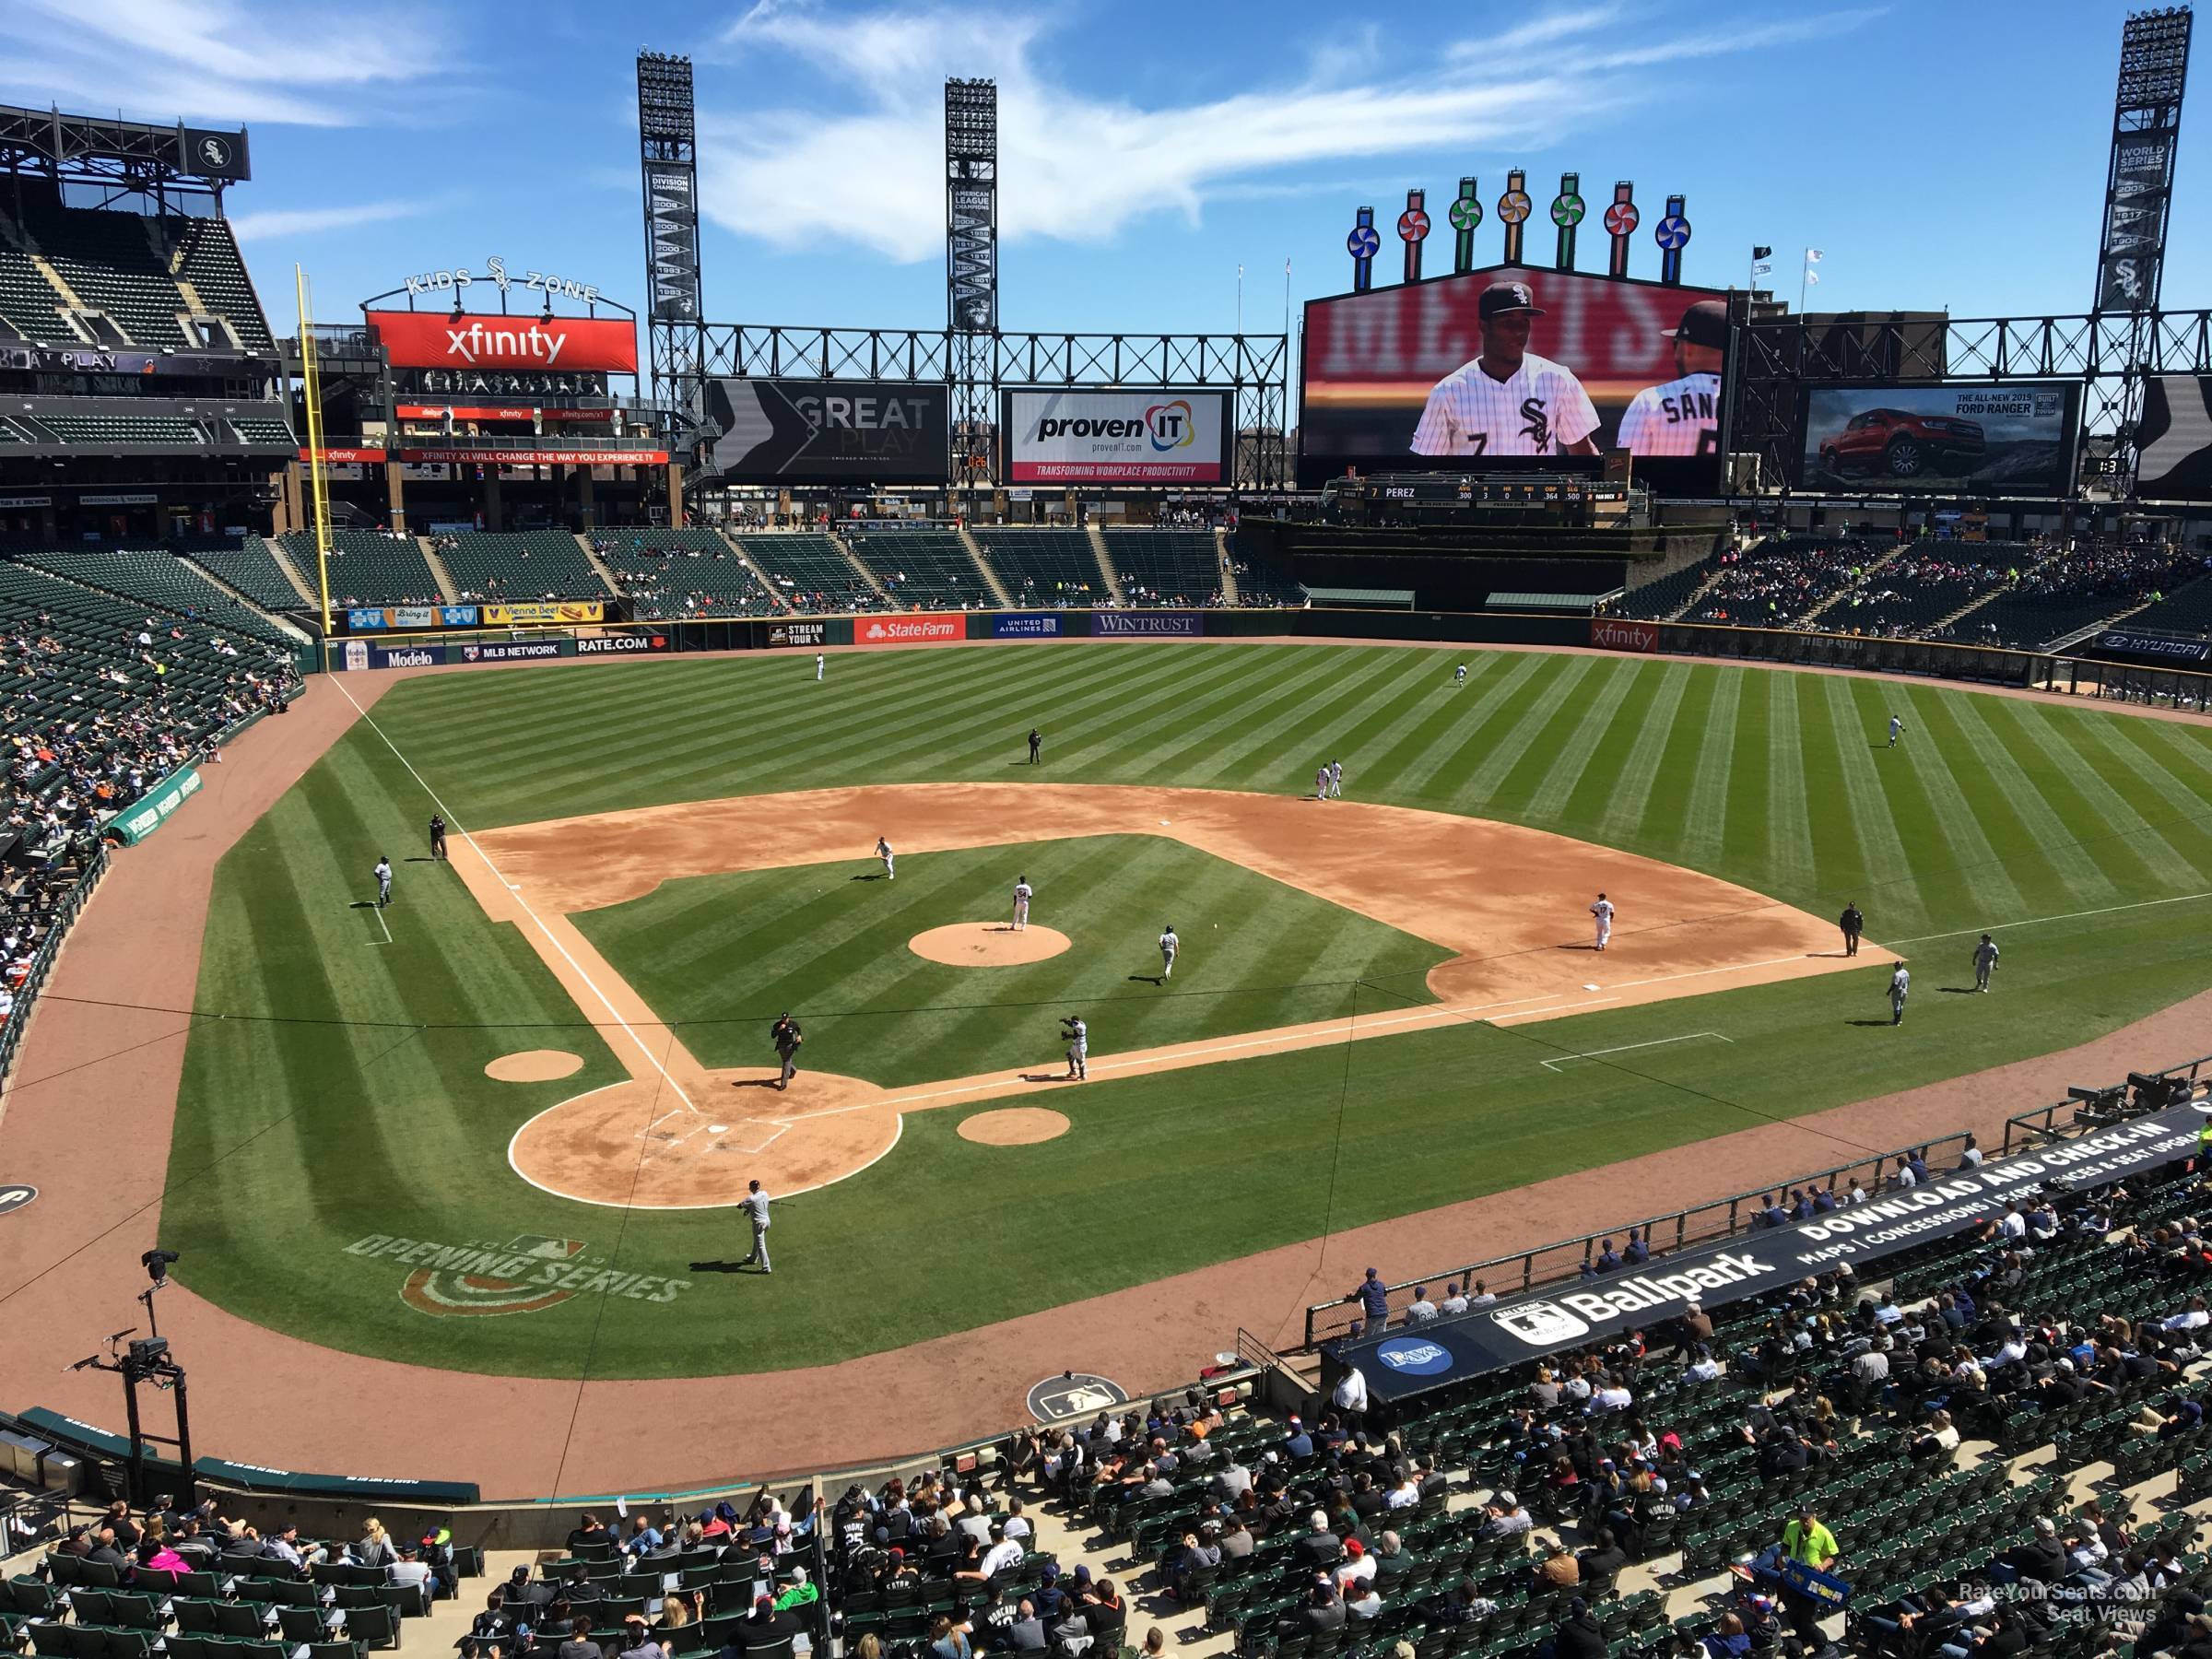 section 330, row 1 seat view  - guaranteed rate field